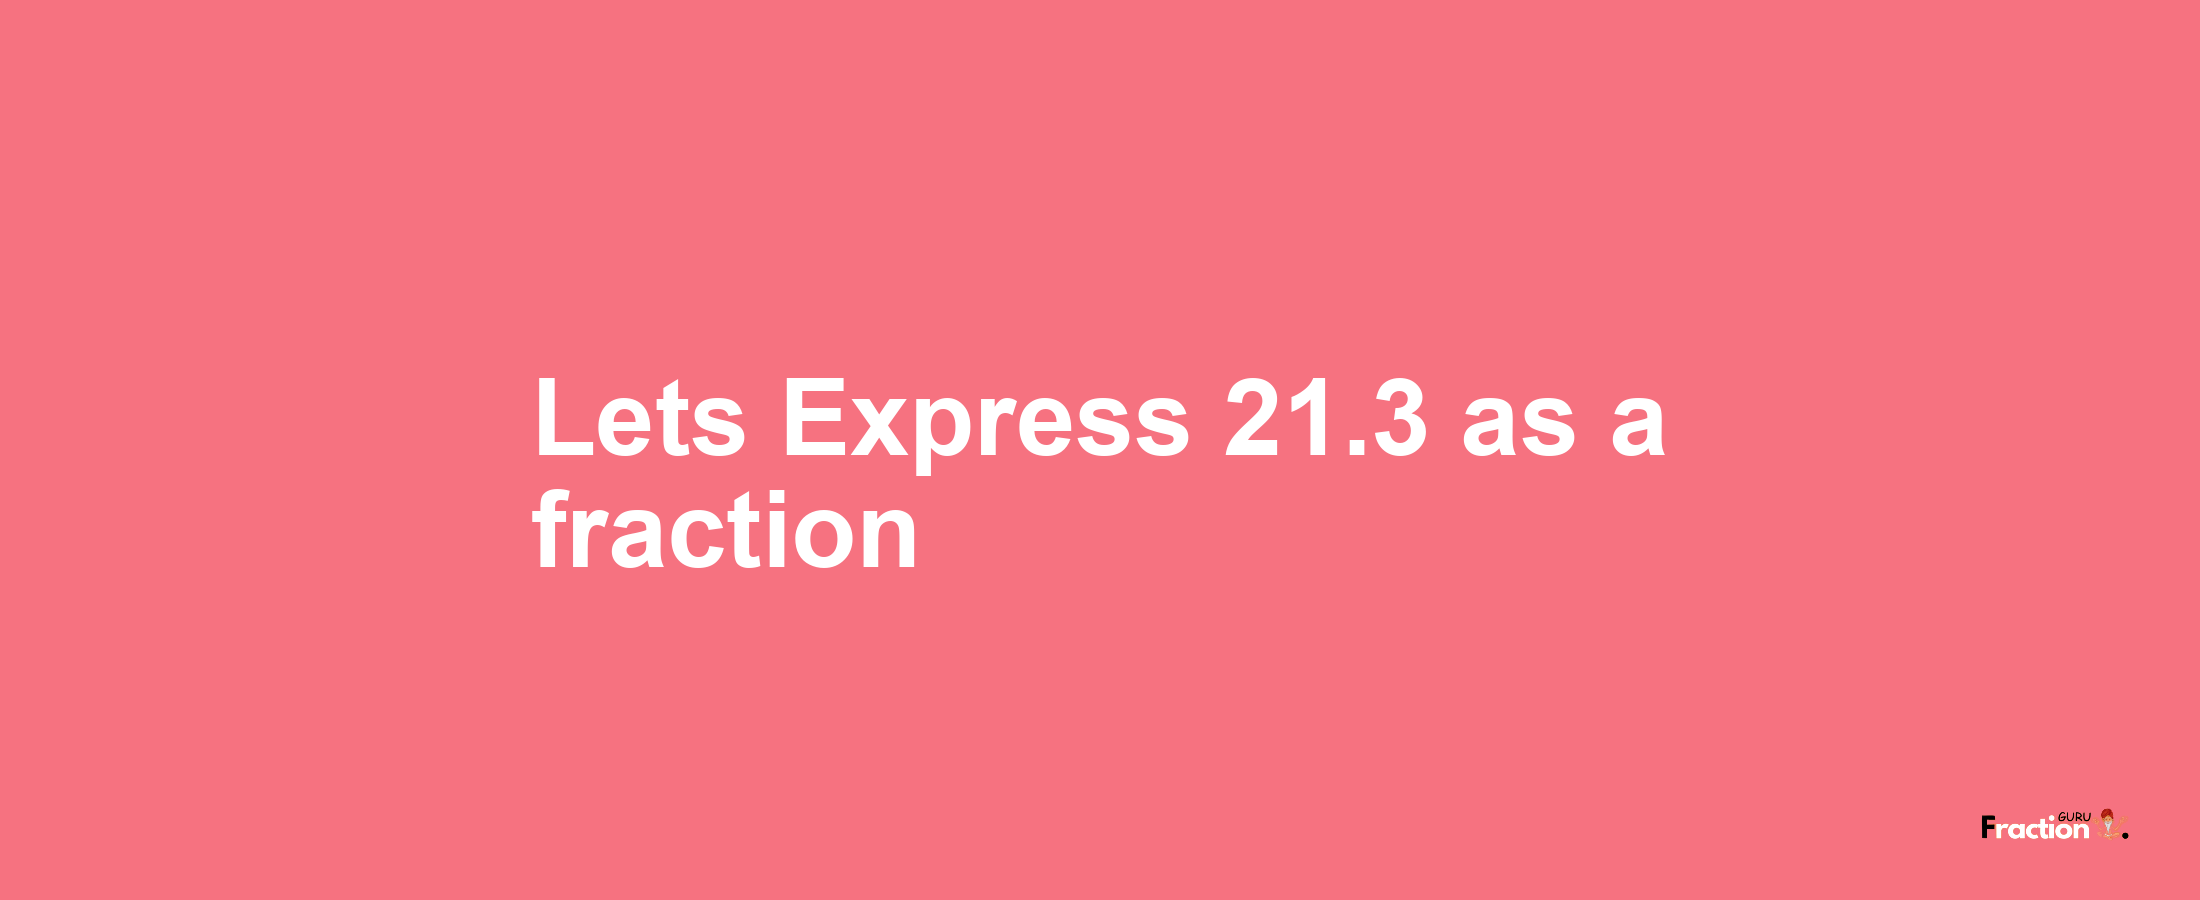 Lets Express 21.3 as afraction